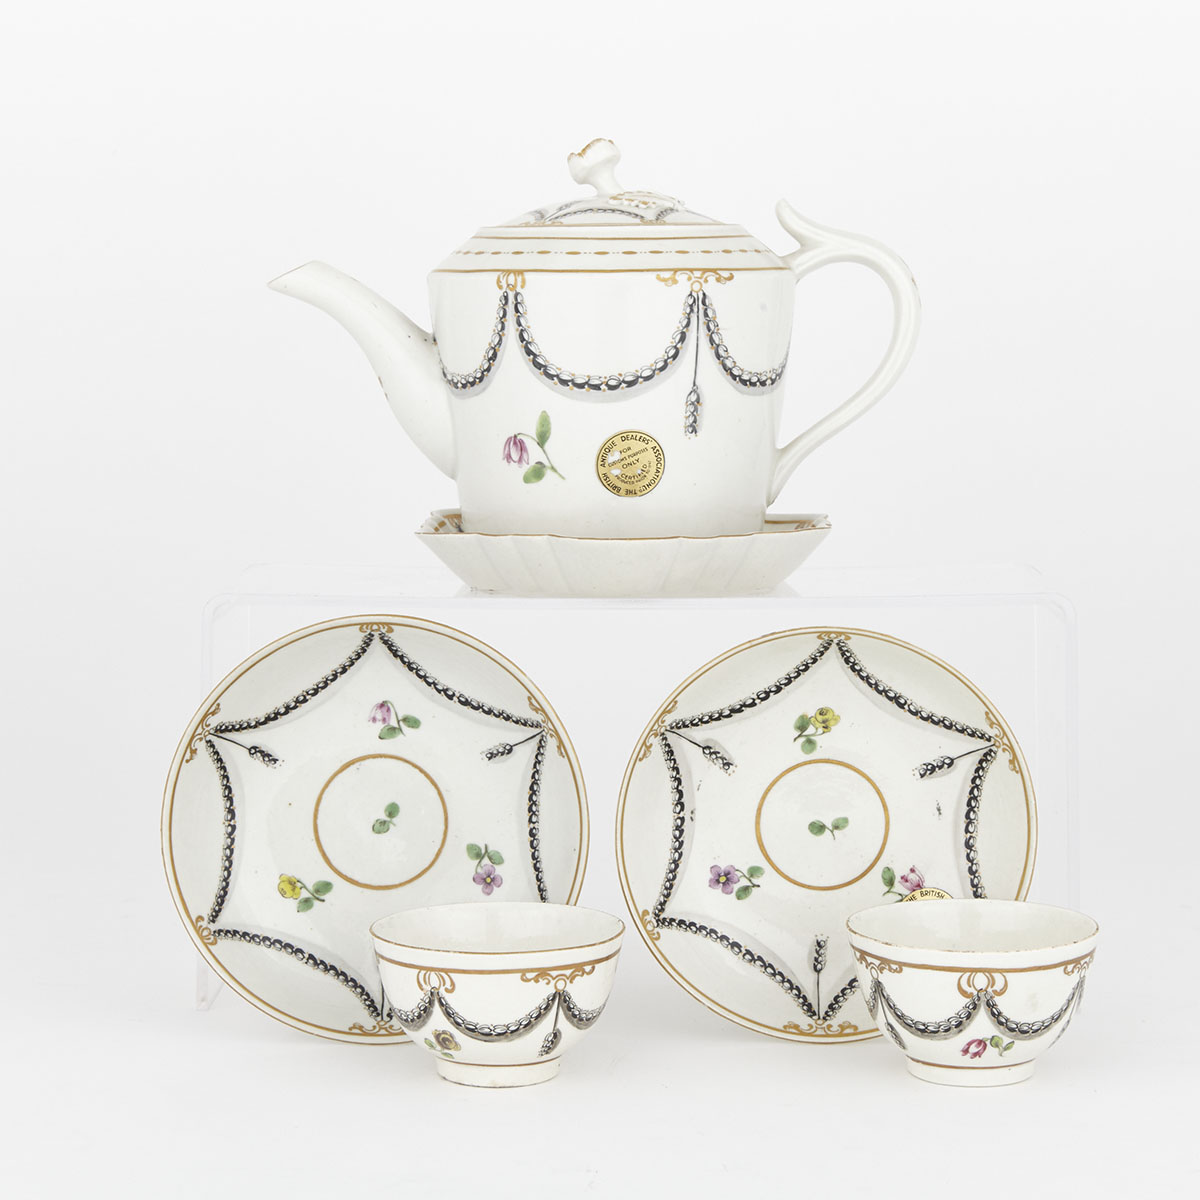 Worcester Teapot with Stand and Two Tea Bowls and Saucers, late 18th century